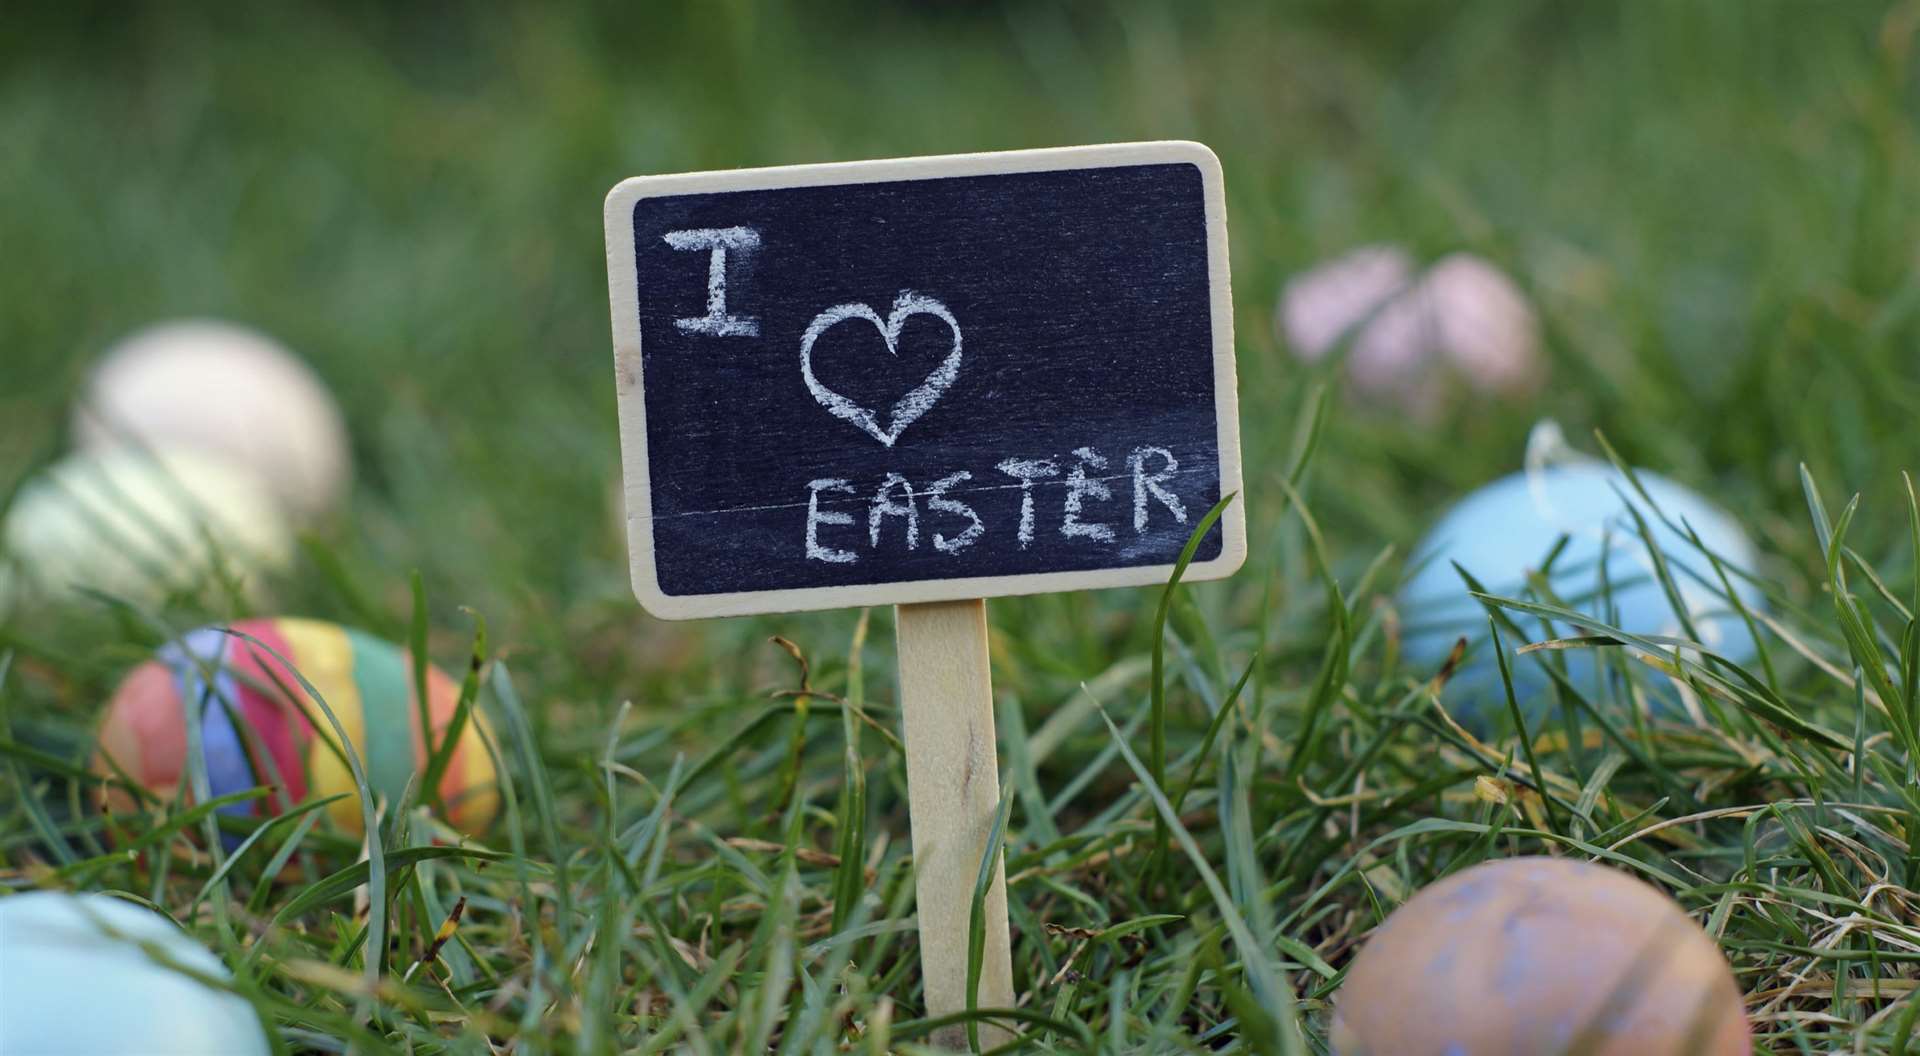 The long Easter weekend has lots going on